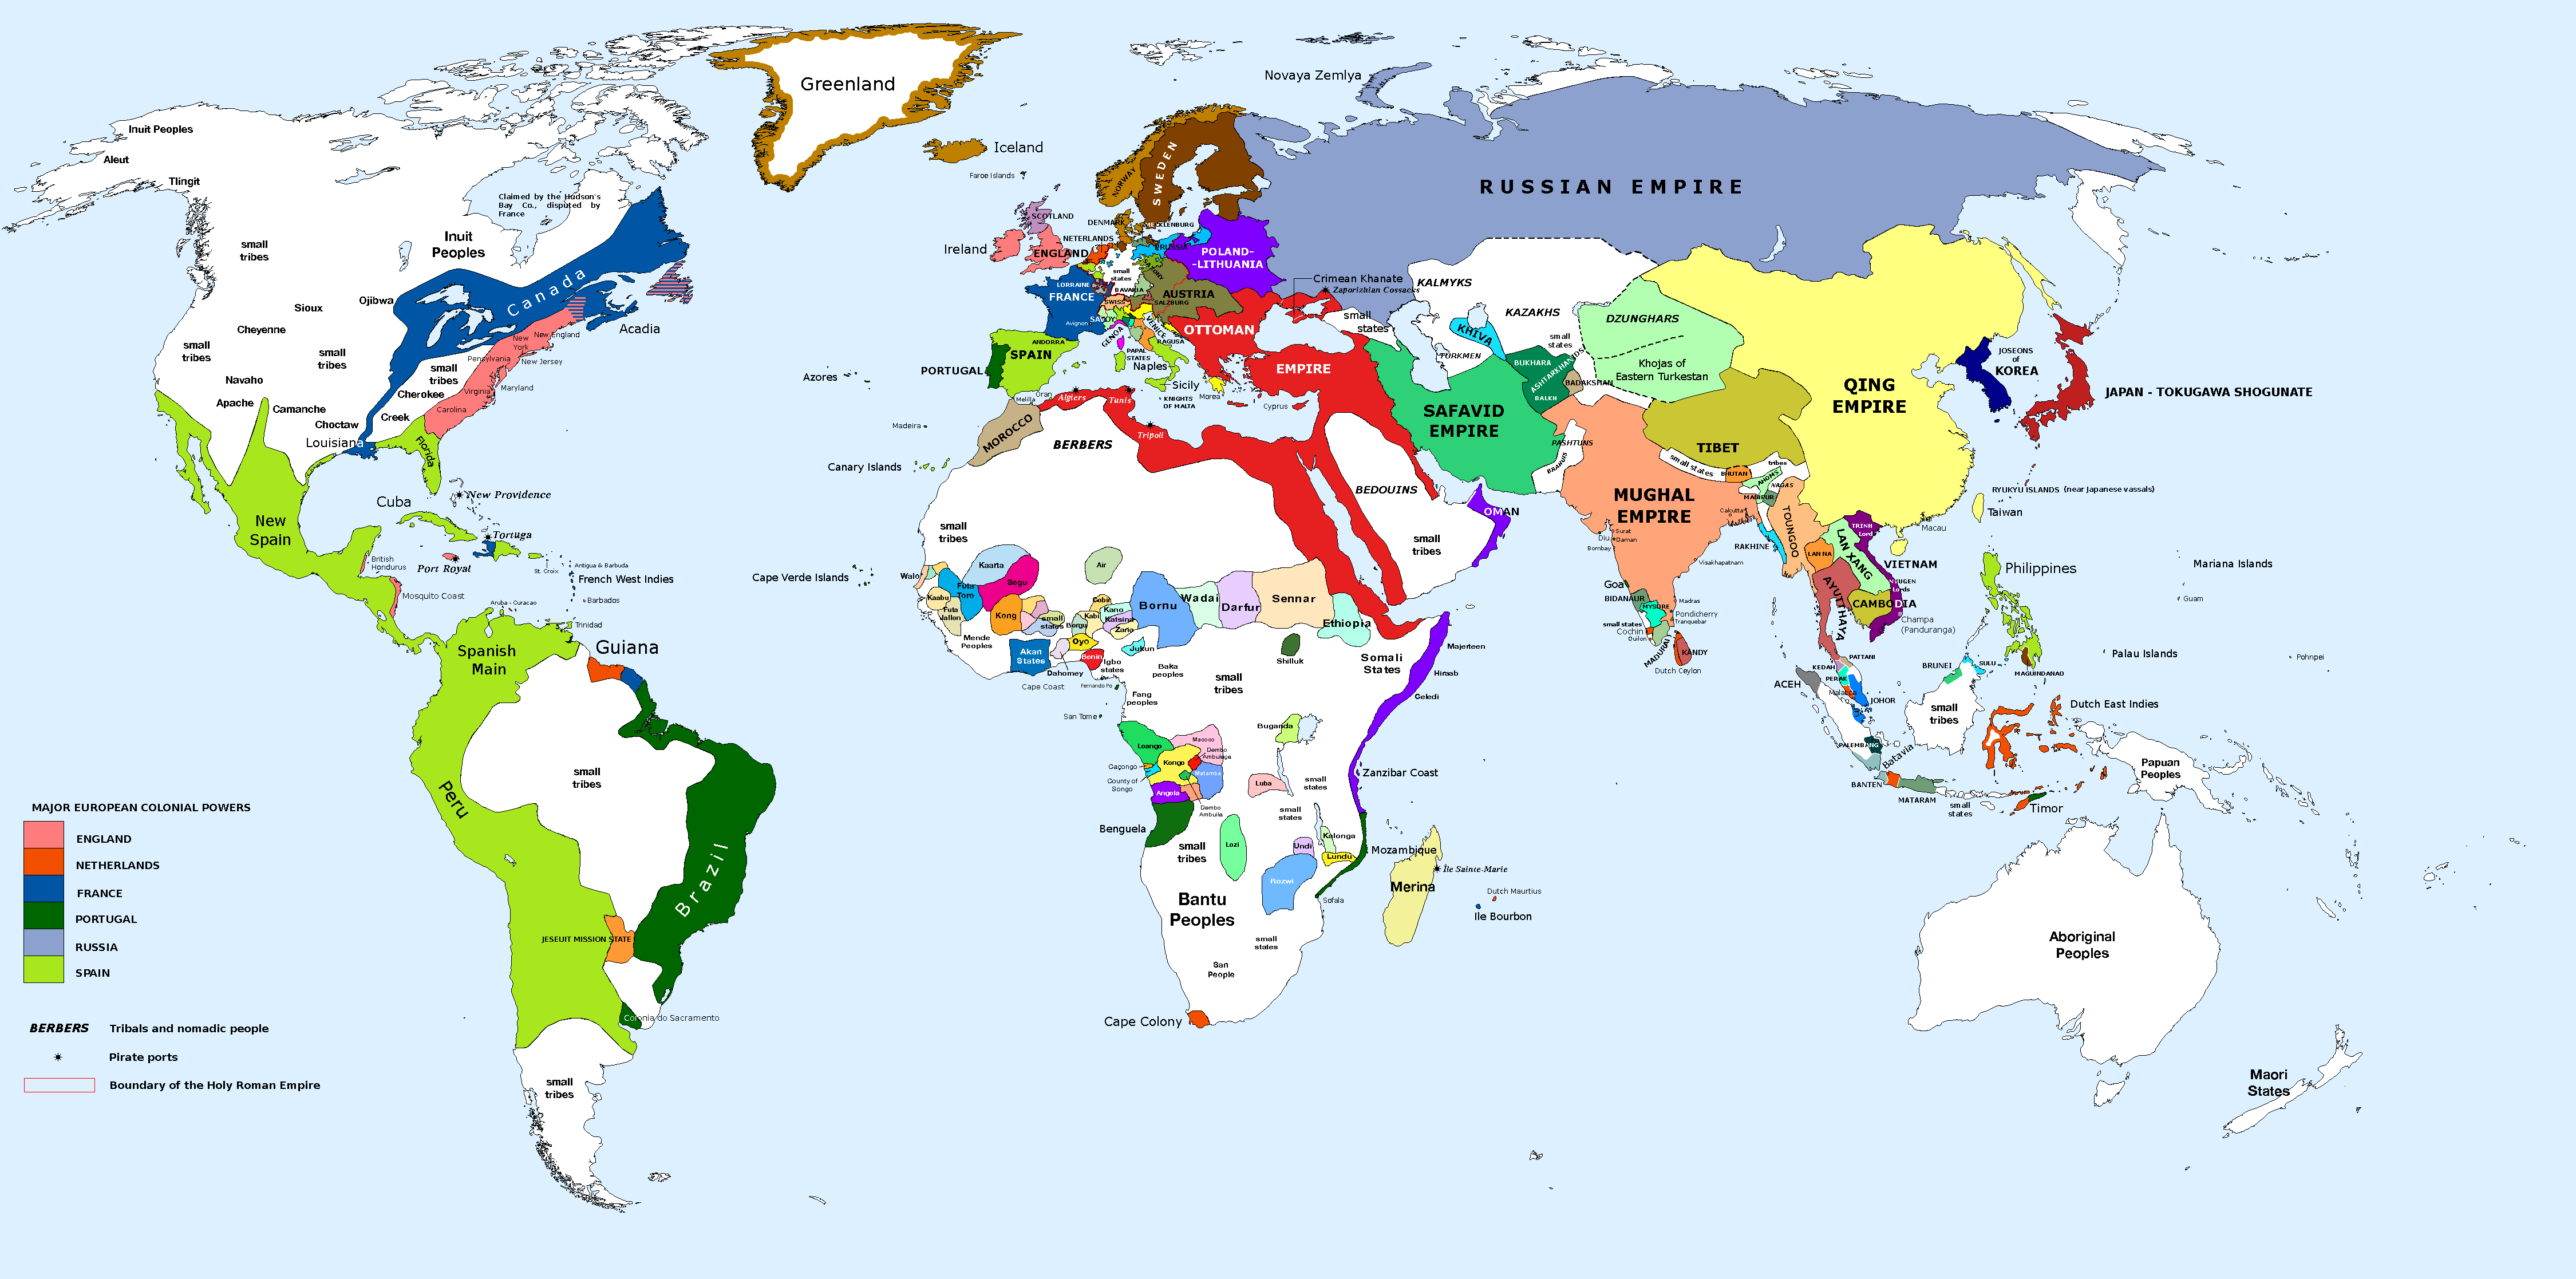 The World in 1700.